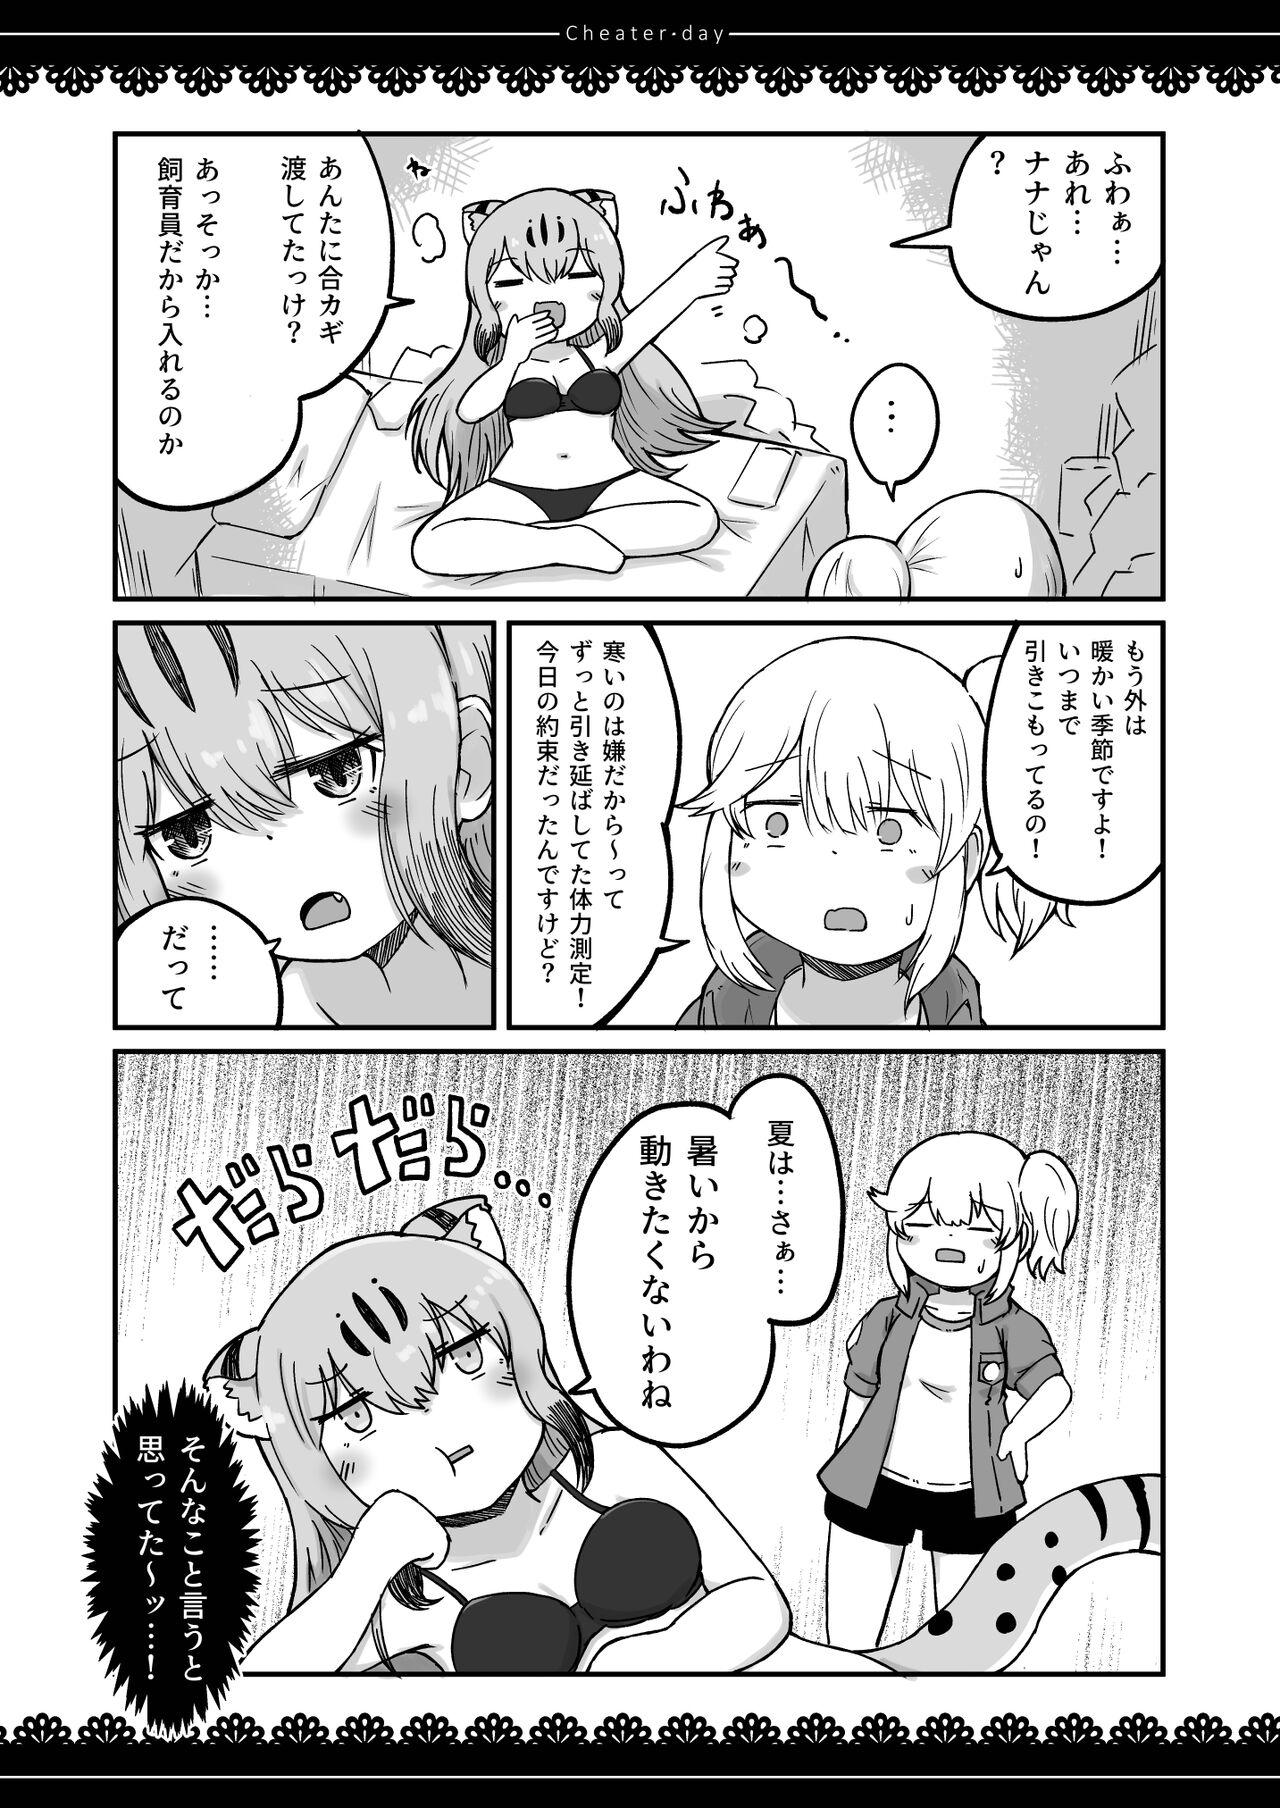 Master Cheater day - Kemono friends Amateur Teen - Page 8